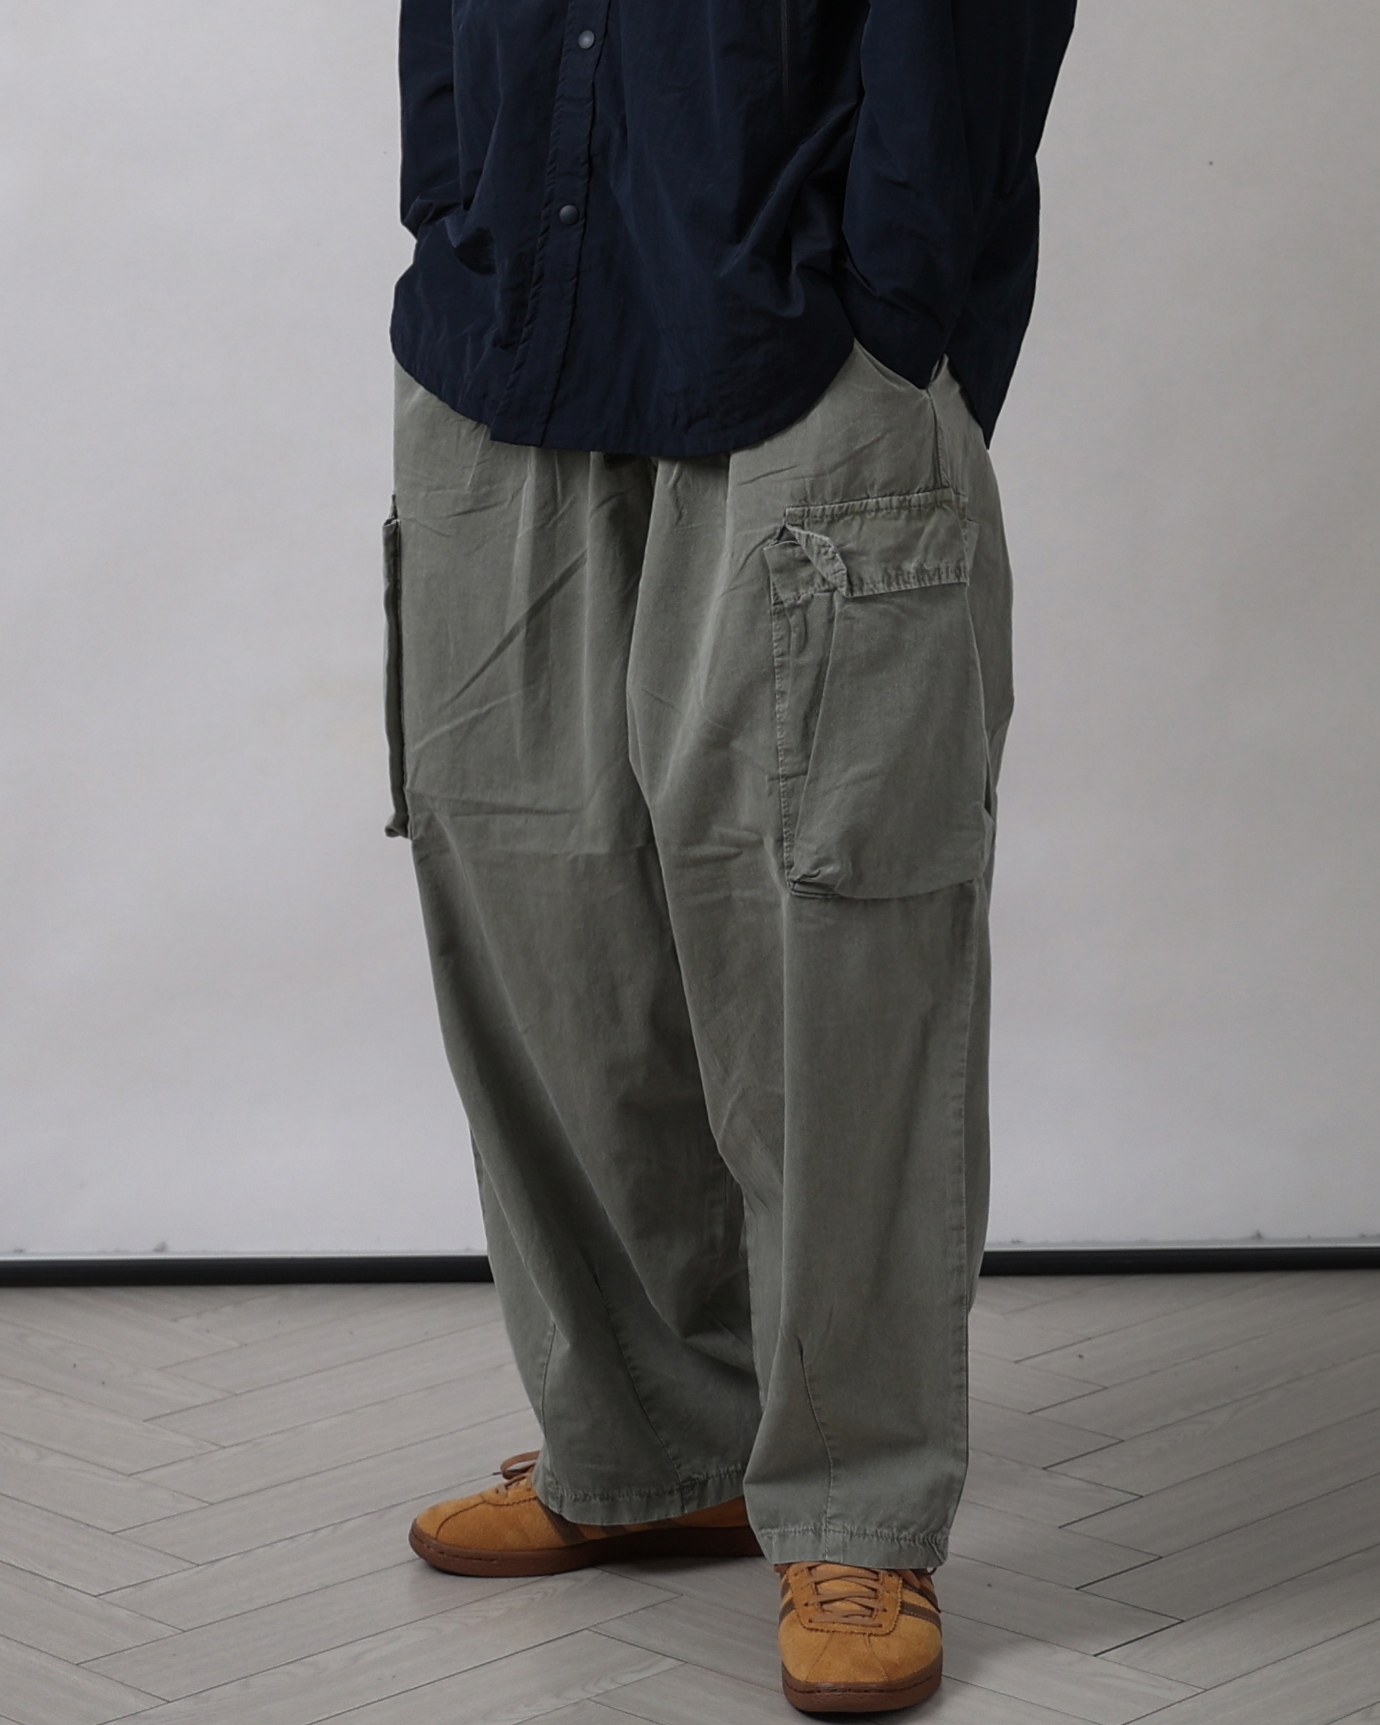 RPEN 525-6 Vintage Cargo Balloon Pants (Charcoal/Olive)